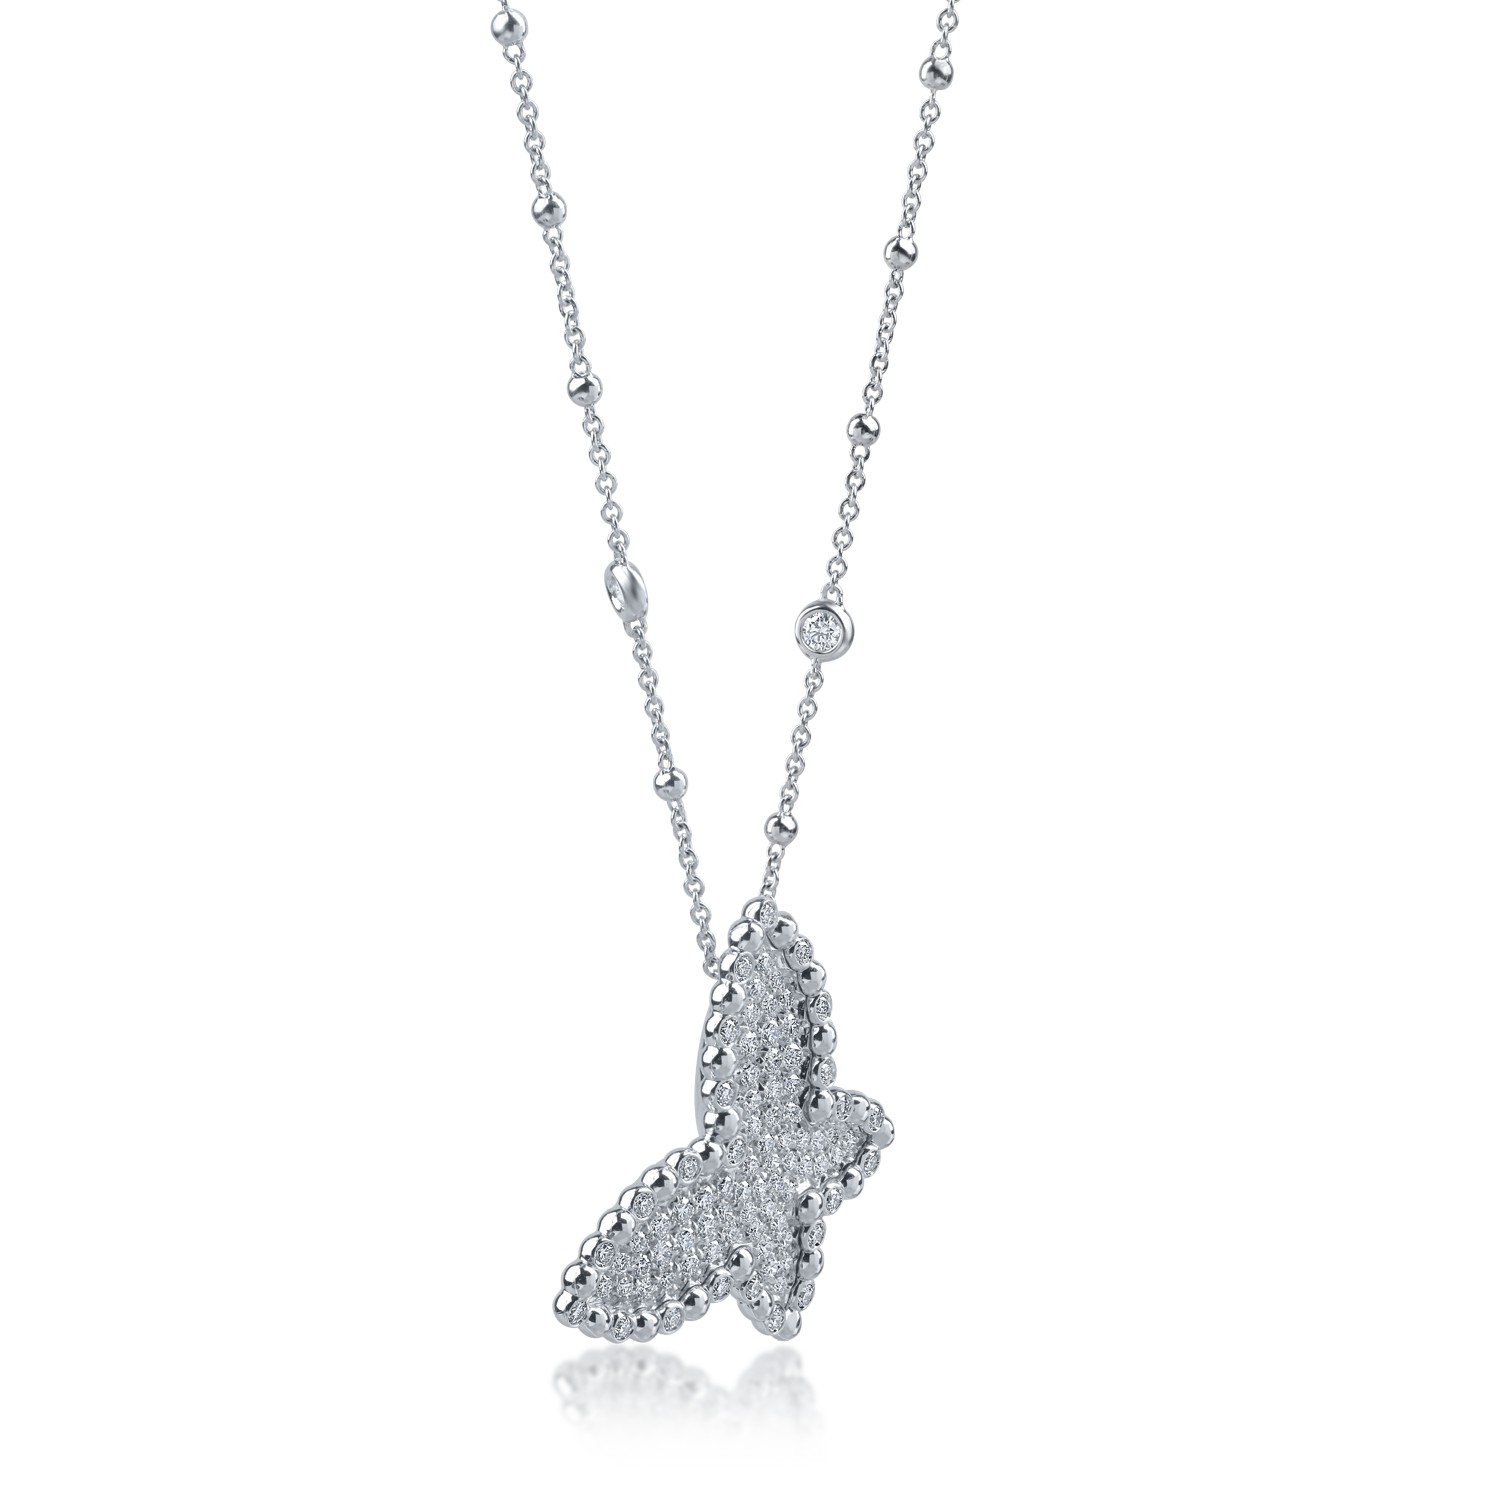 White gold pendant necklace with 2.38ct diamonds